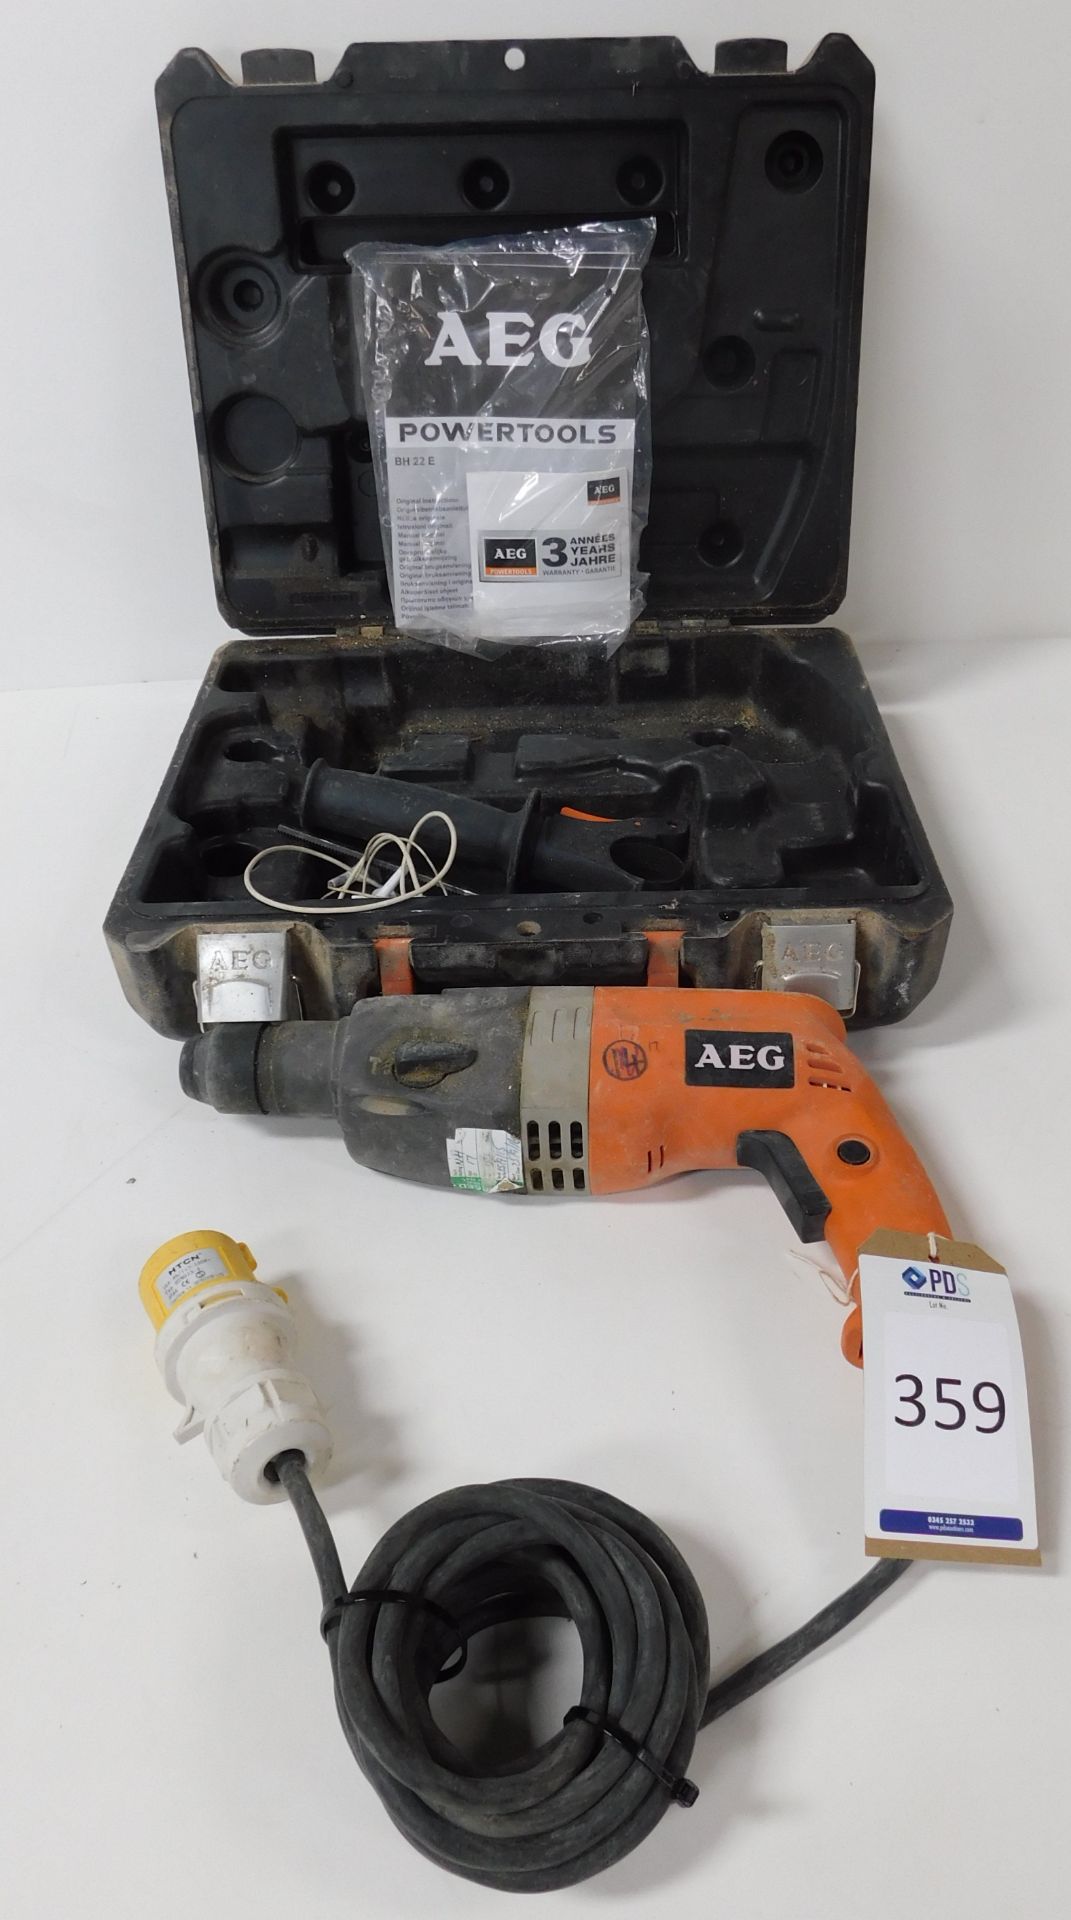 AEG BH 22 E Hammer Drill, 110v (Location: Brentwood - See General Notes for Details)